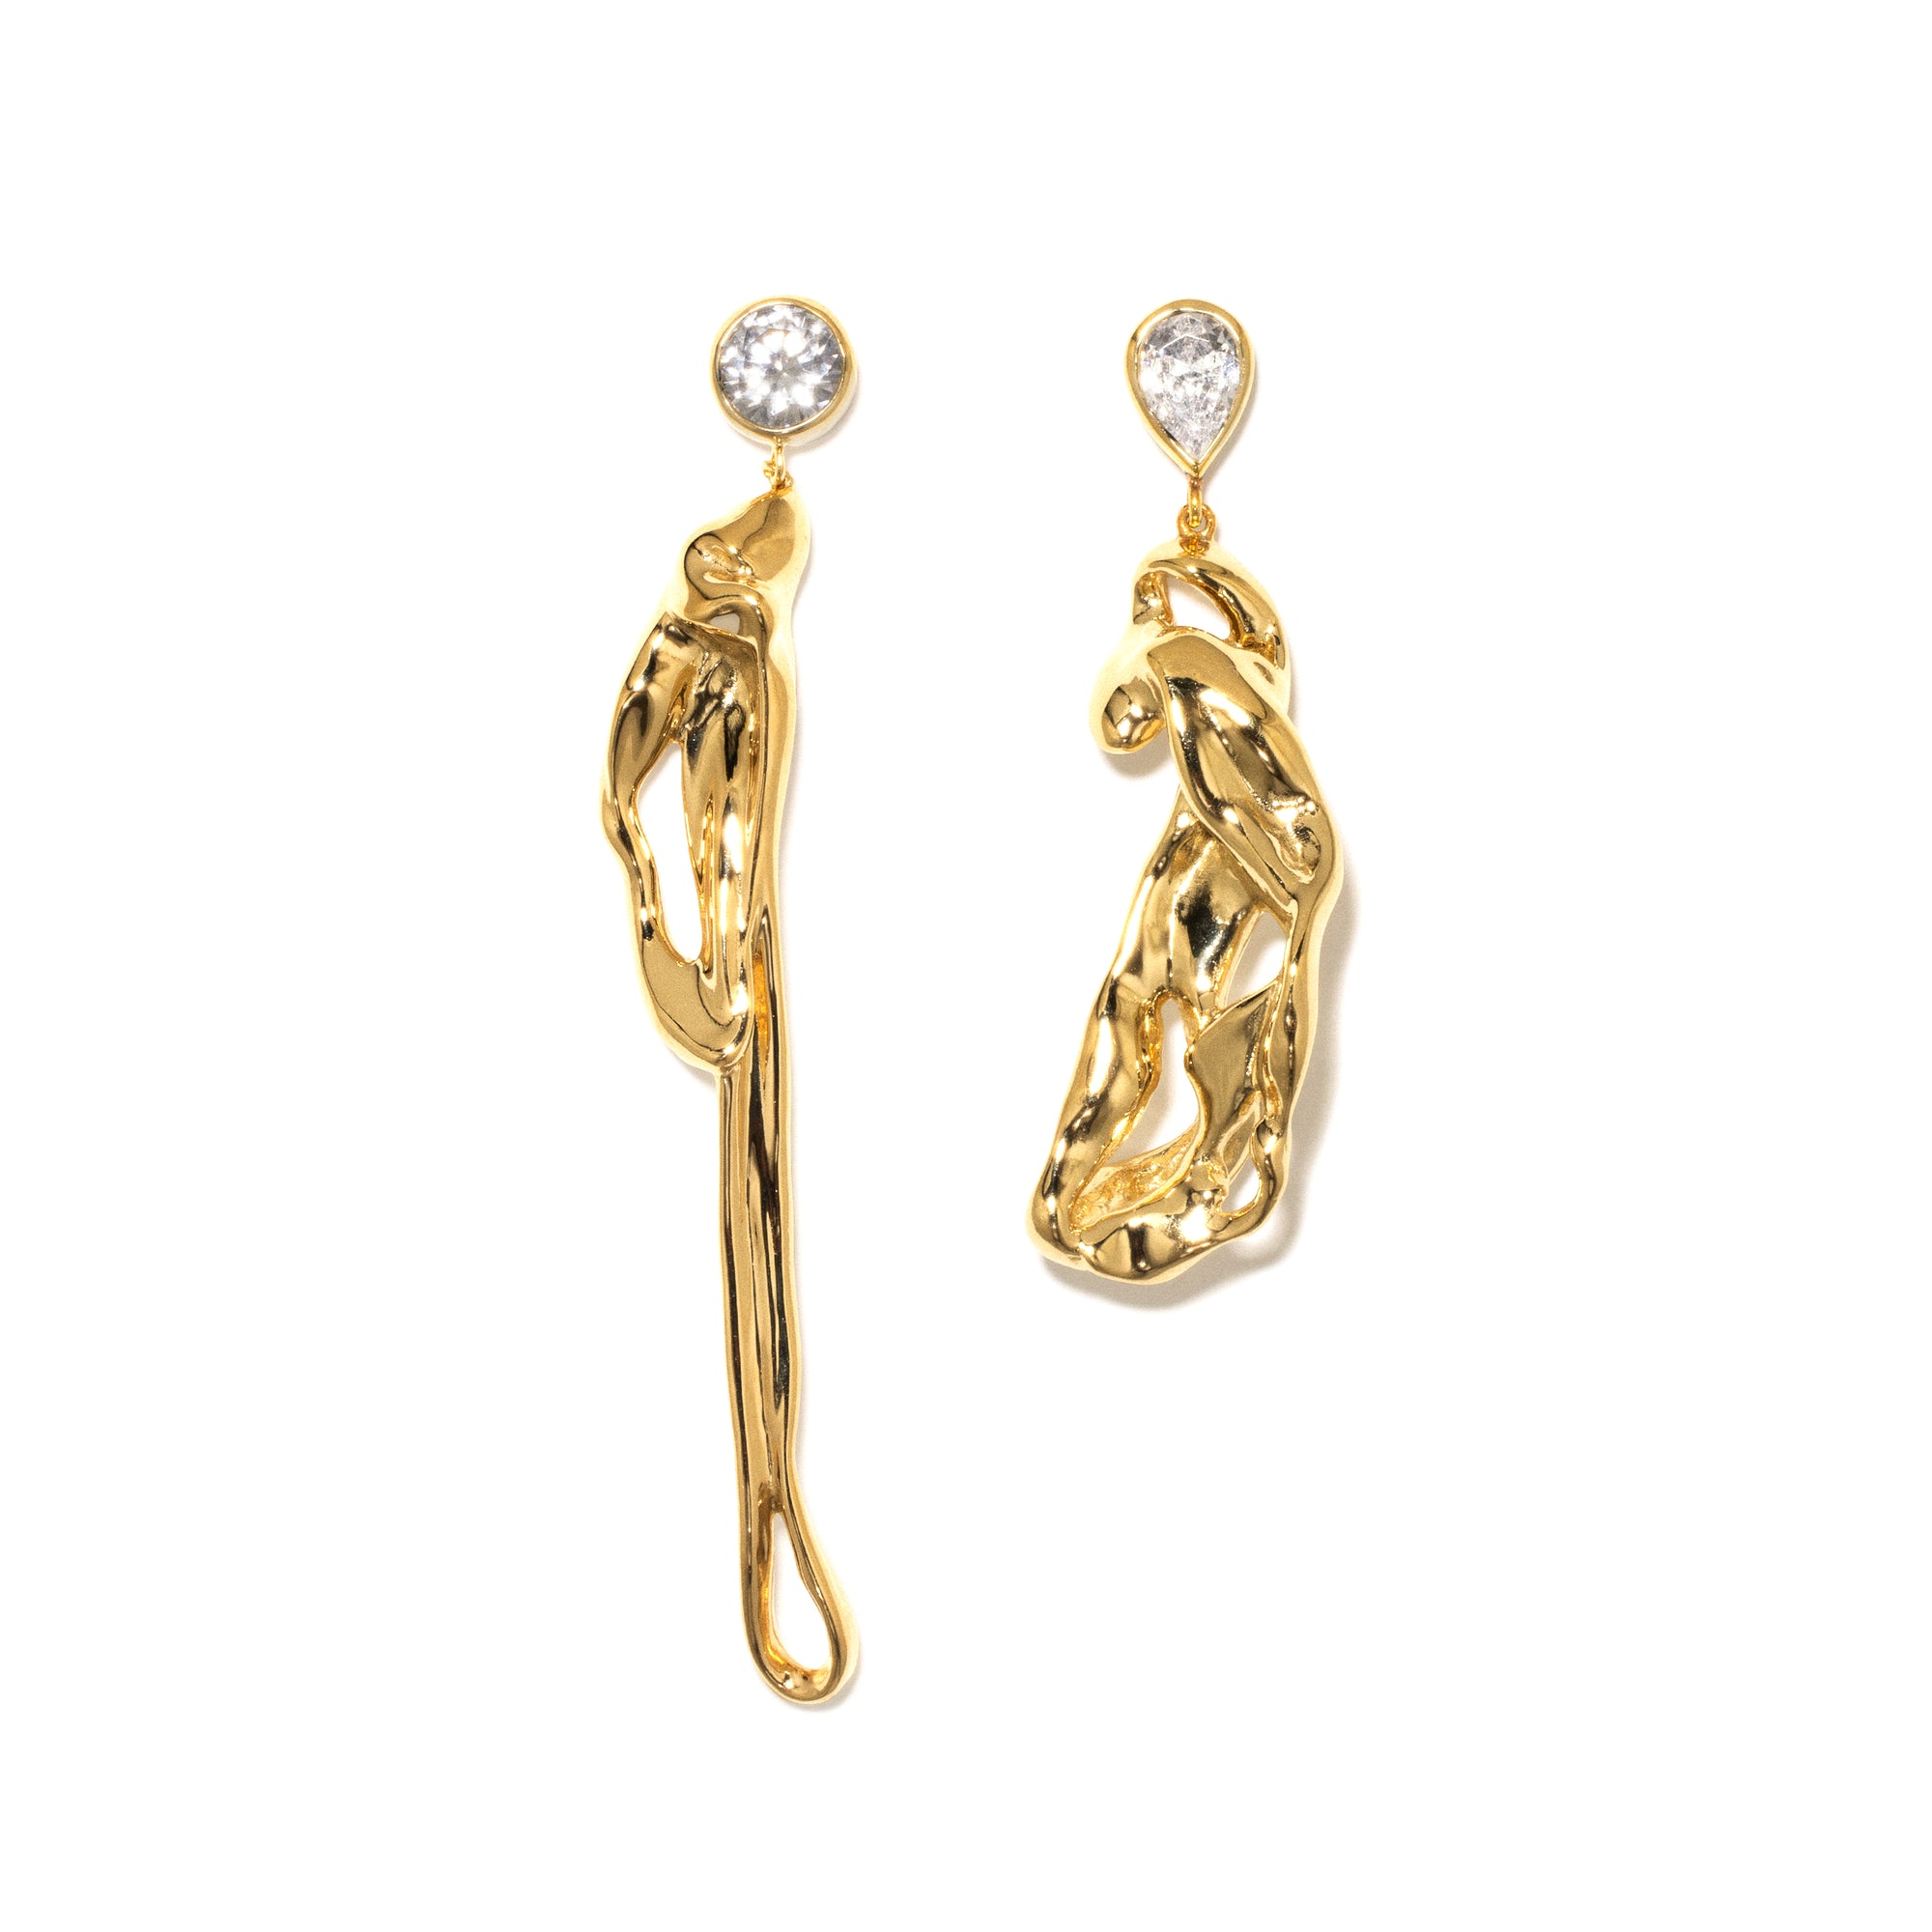 Completedworks - Women's Dreams of Mercury Earrings - (Yellow Gold) view 1